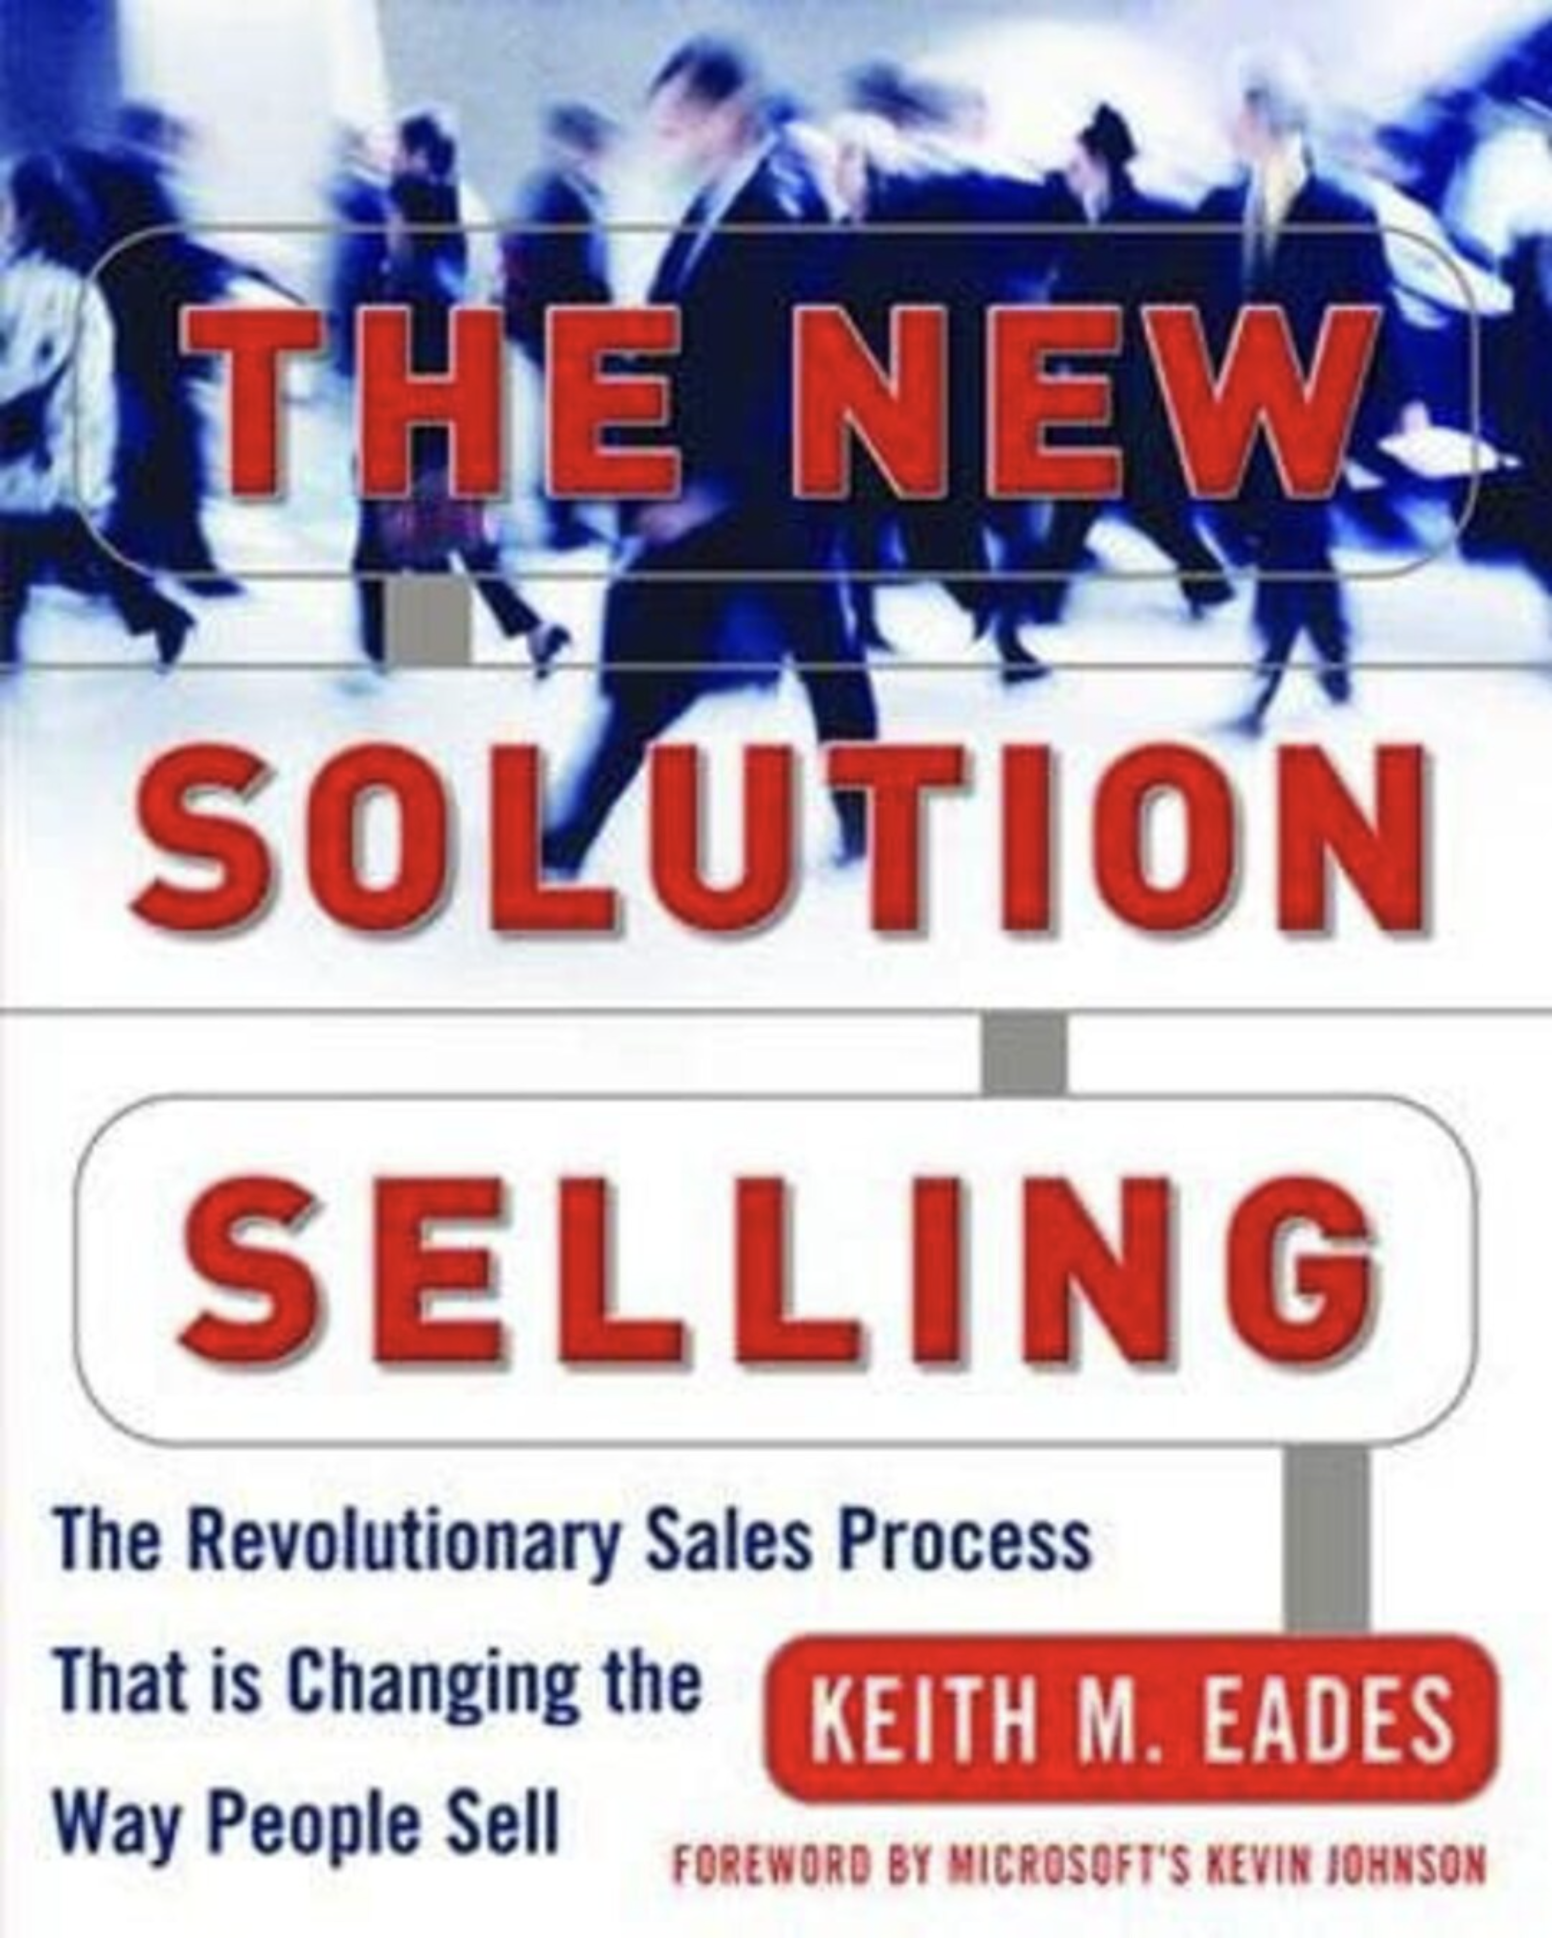 The New Solution Selling by Keith M. Eades